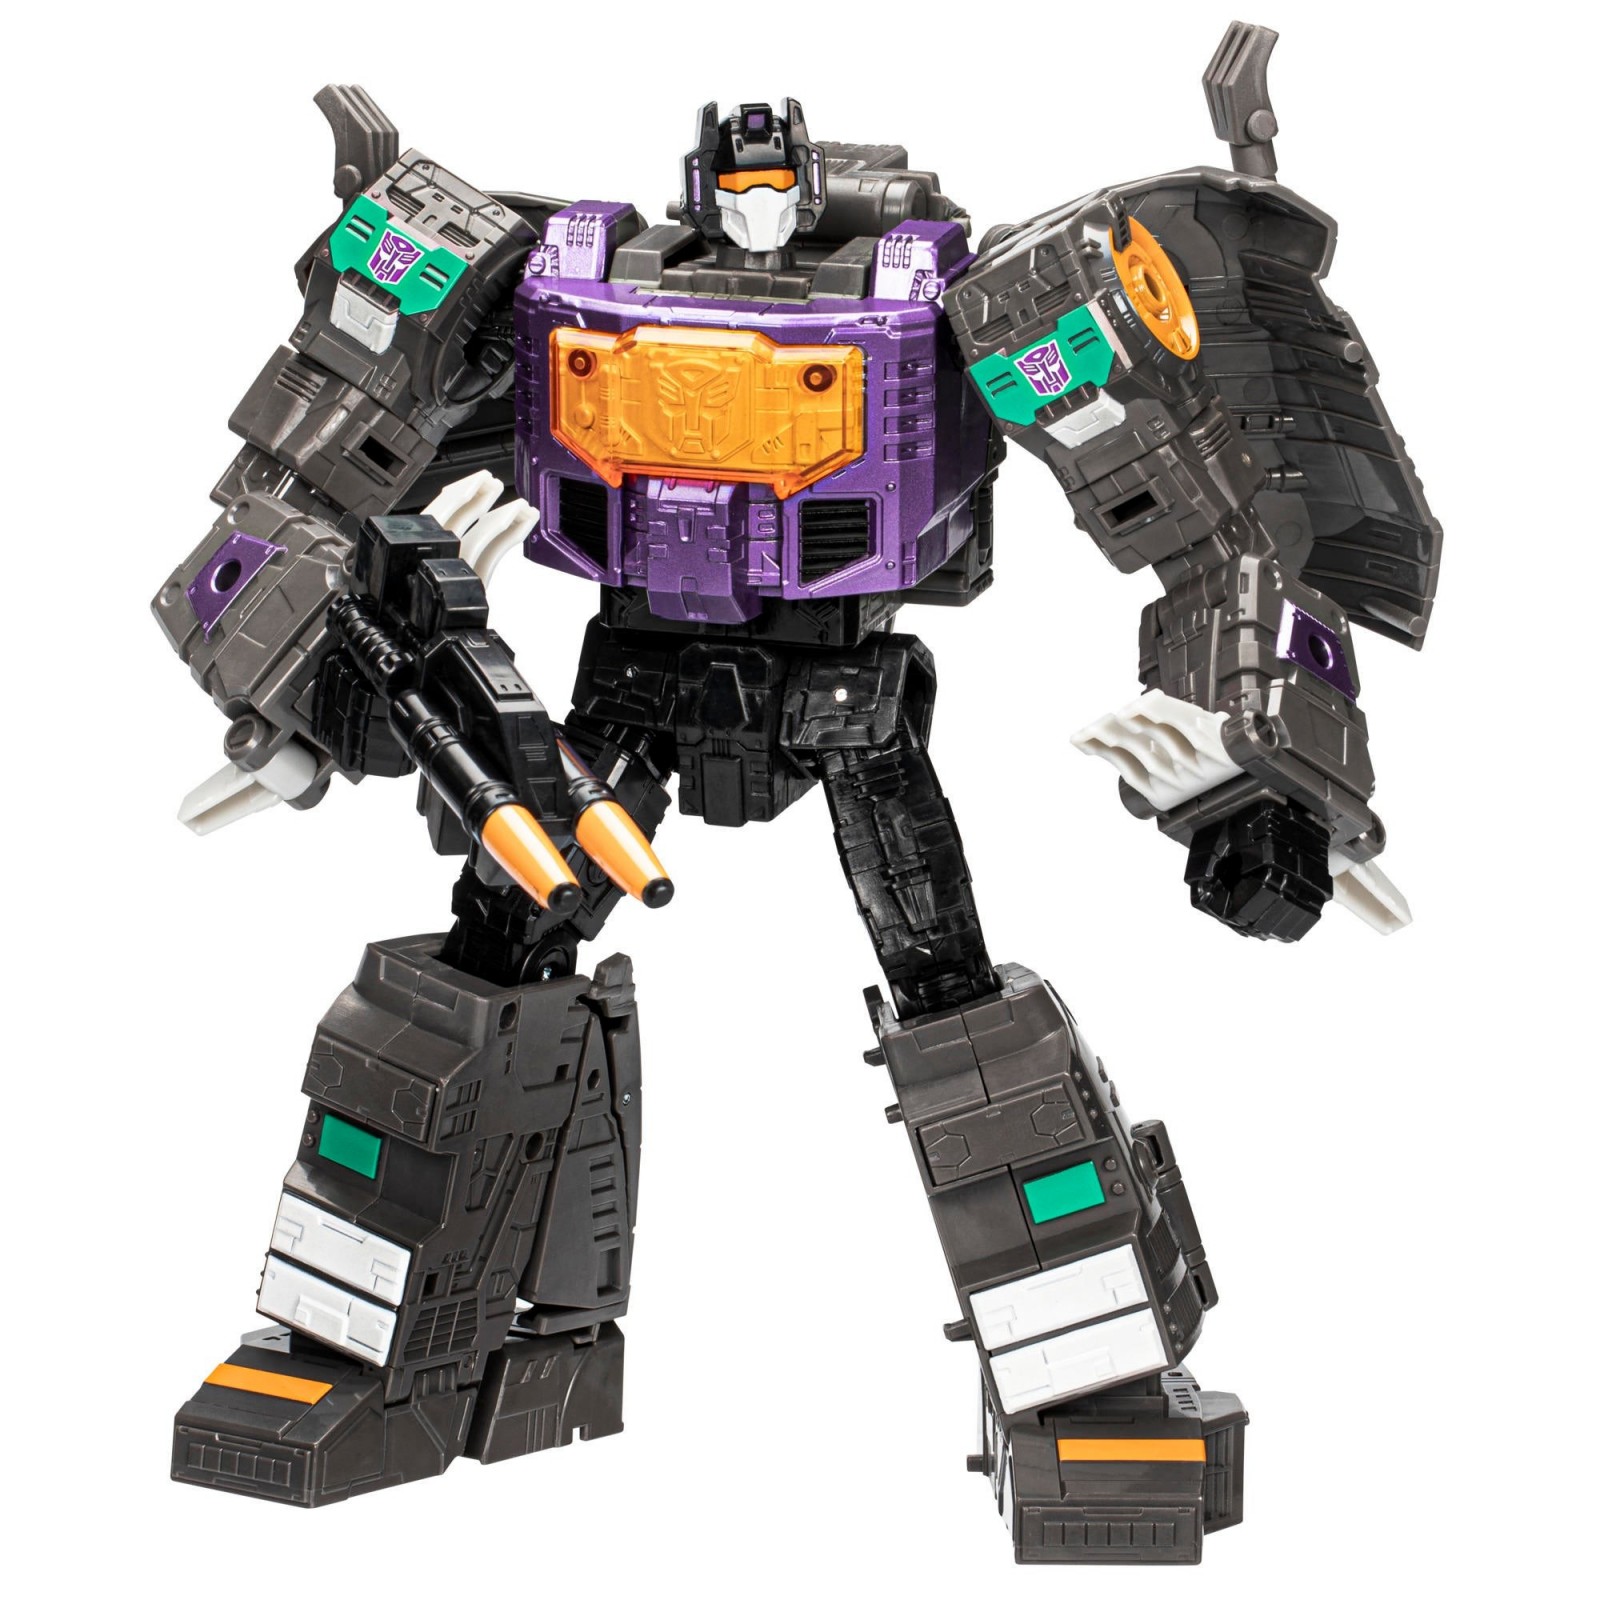 Shattered Glass Leader Class Grimlock Revealed - Transformers